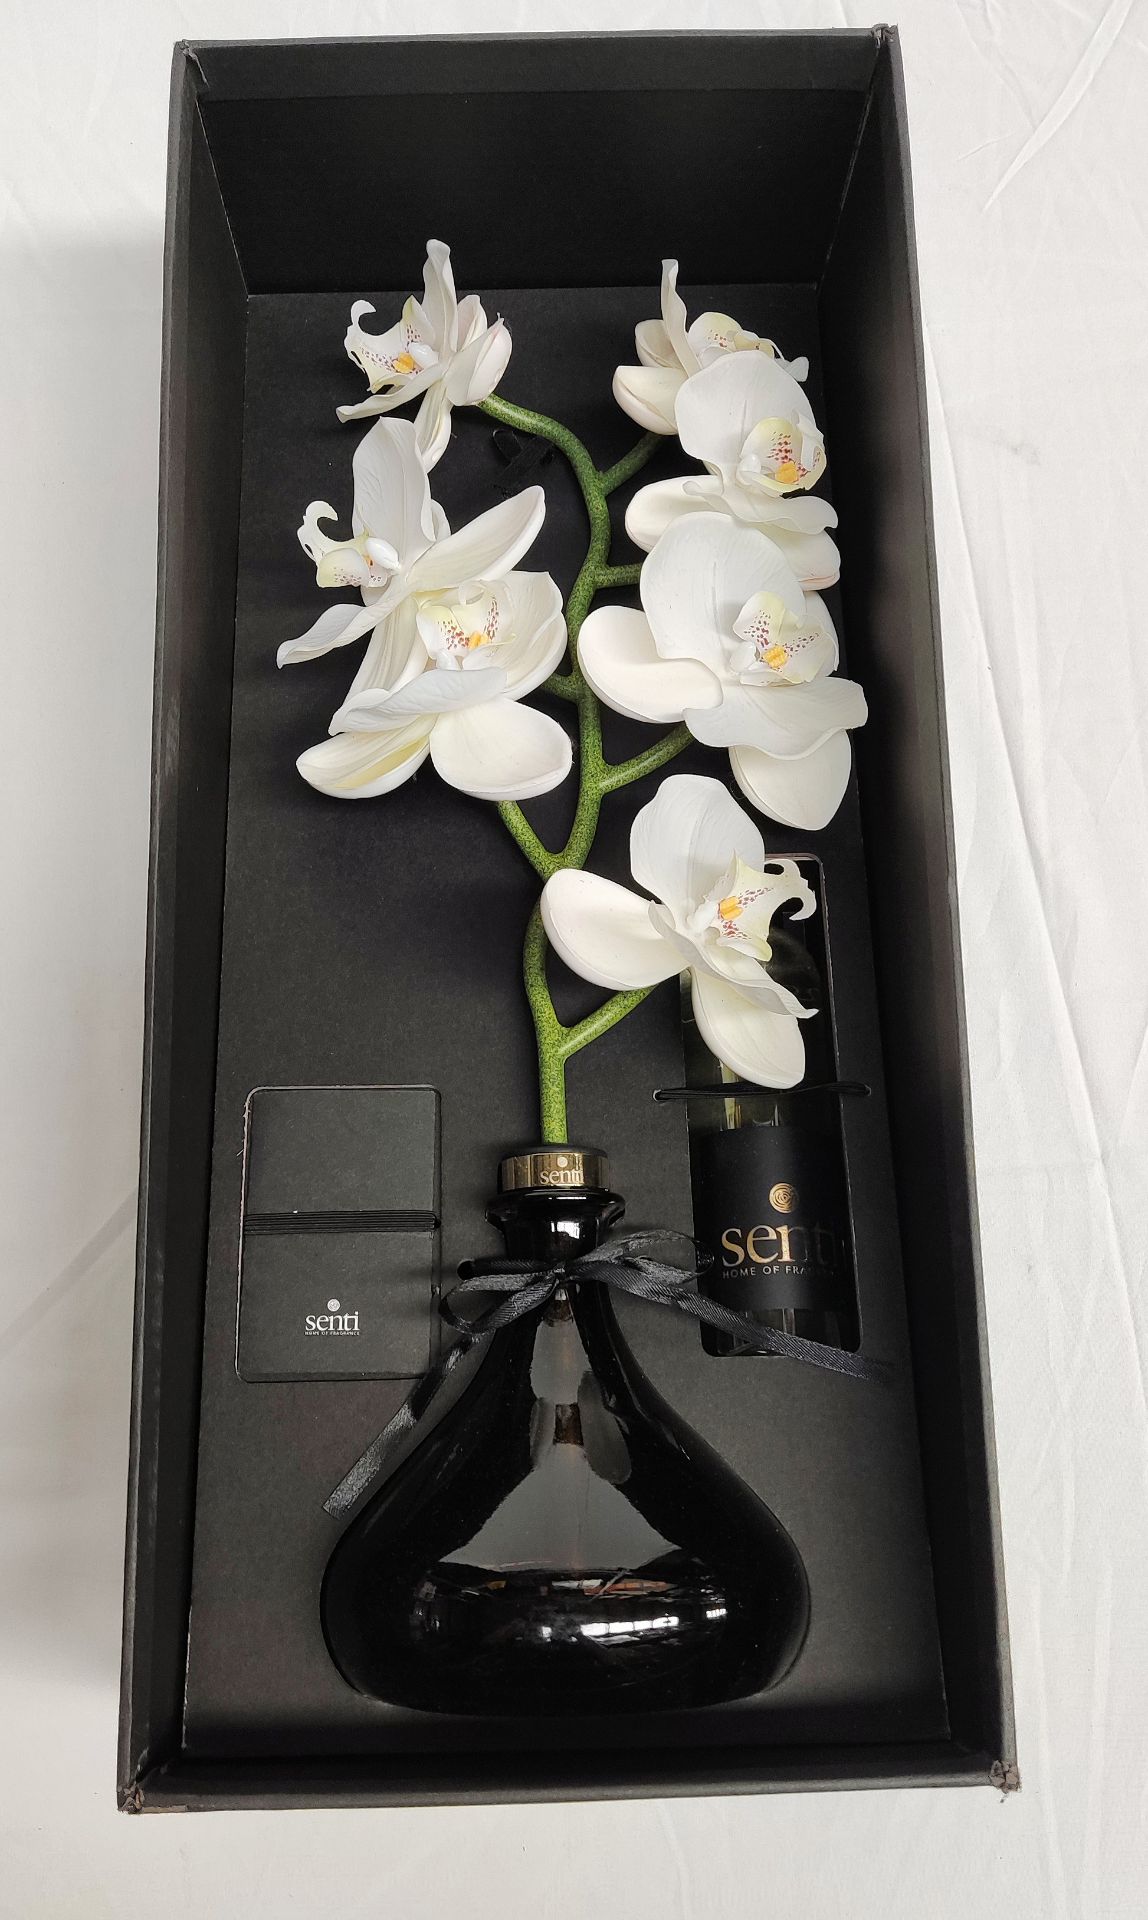 1 x SENTI Fig Fragrance Orchid Diffuser (250ml) With Italian Glass Base - Boxed - Original RRP £ - Image 3 of 18